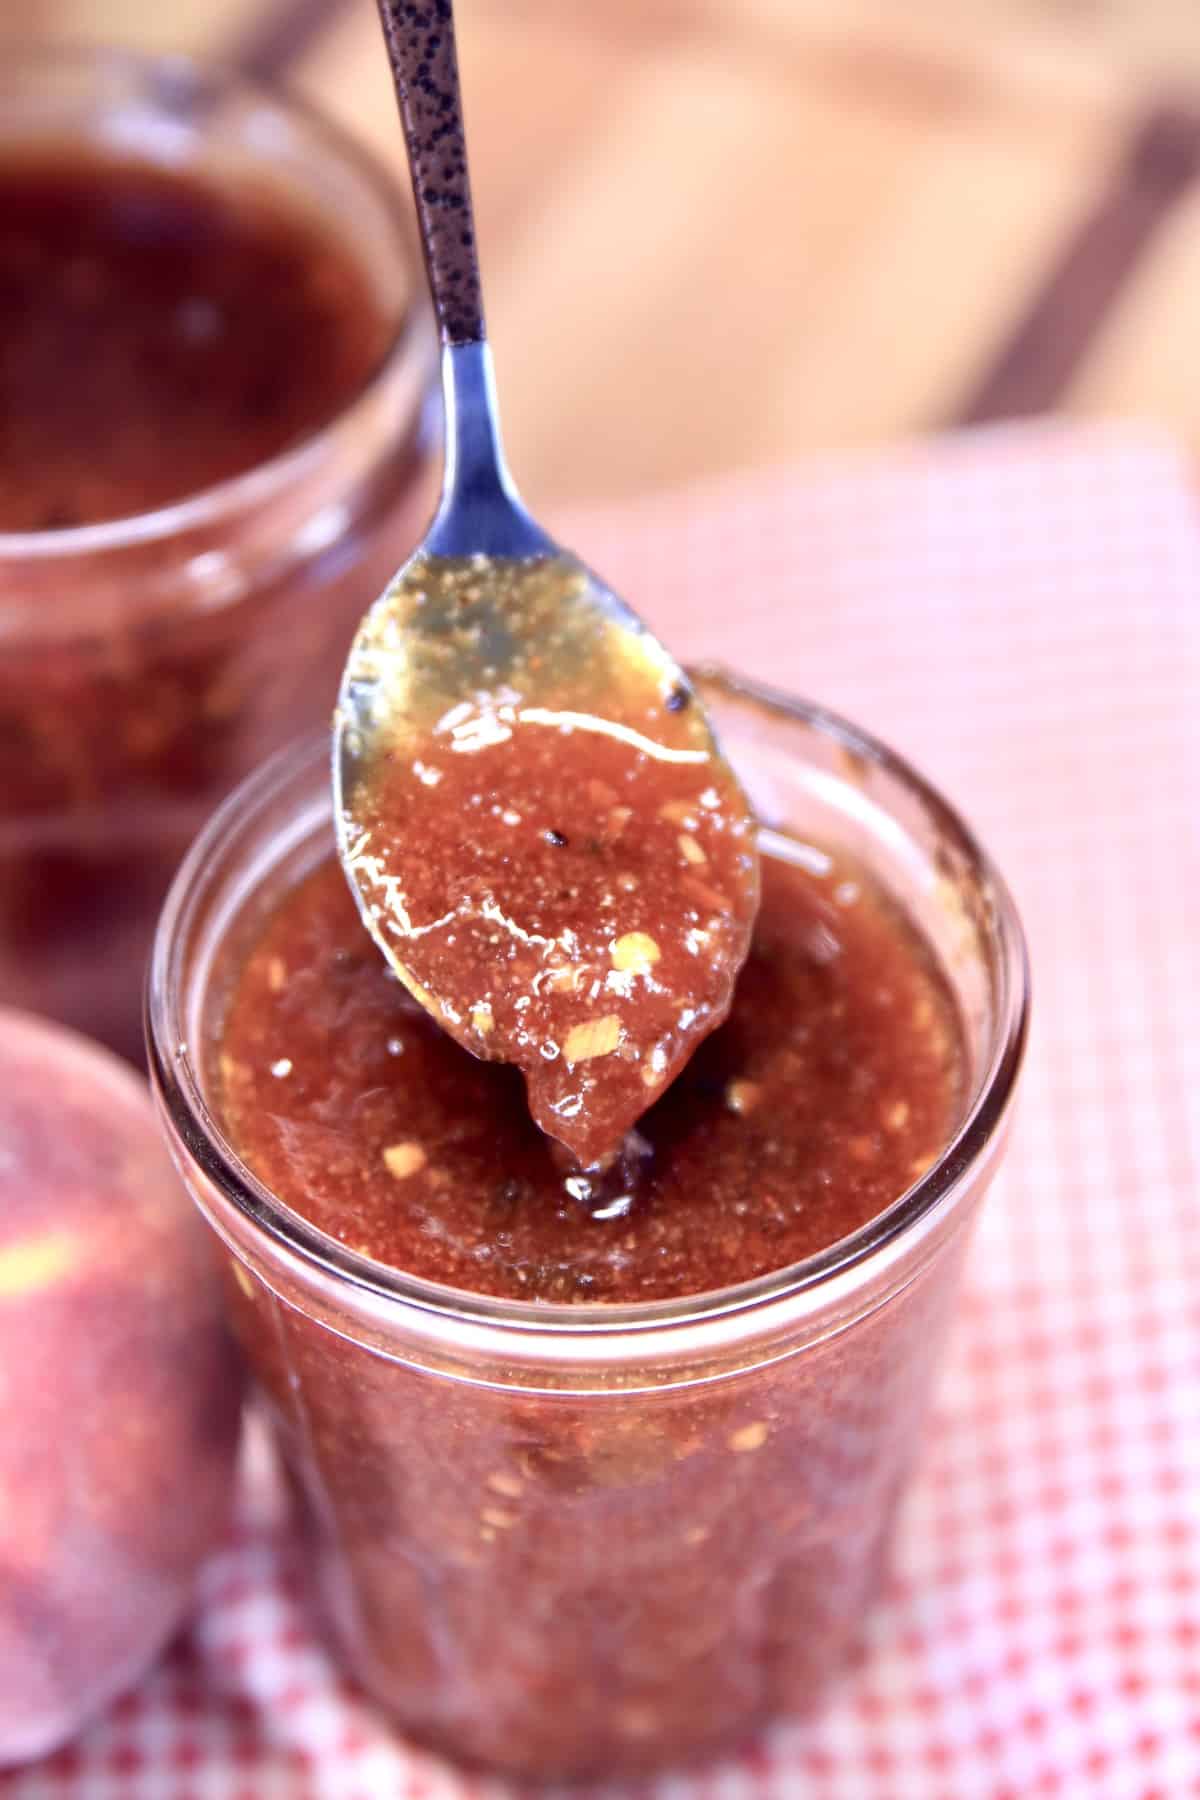 Spoonful of bbq sauce dipping from jar.